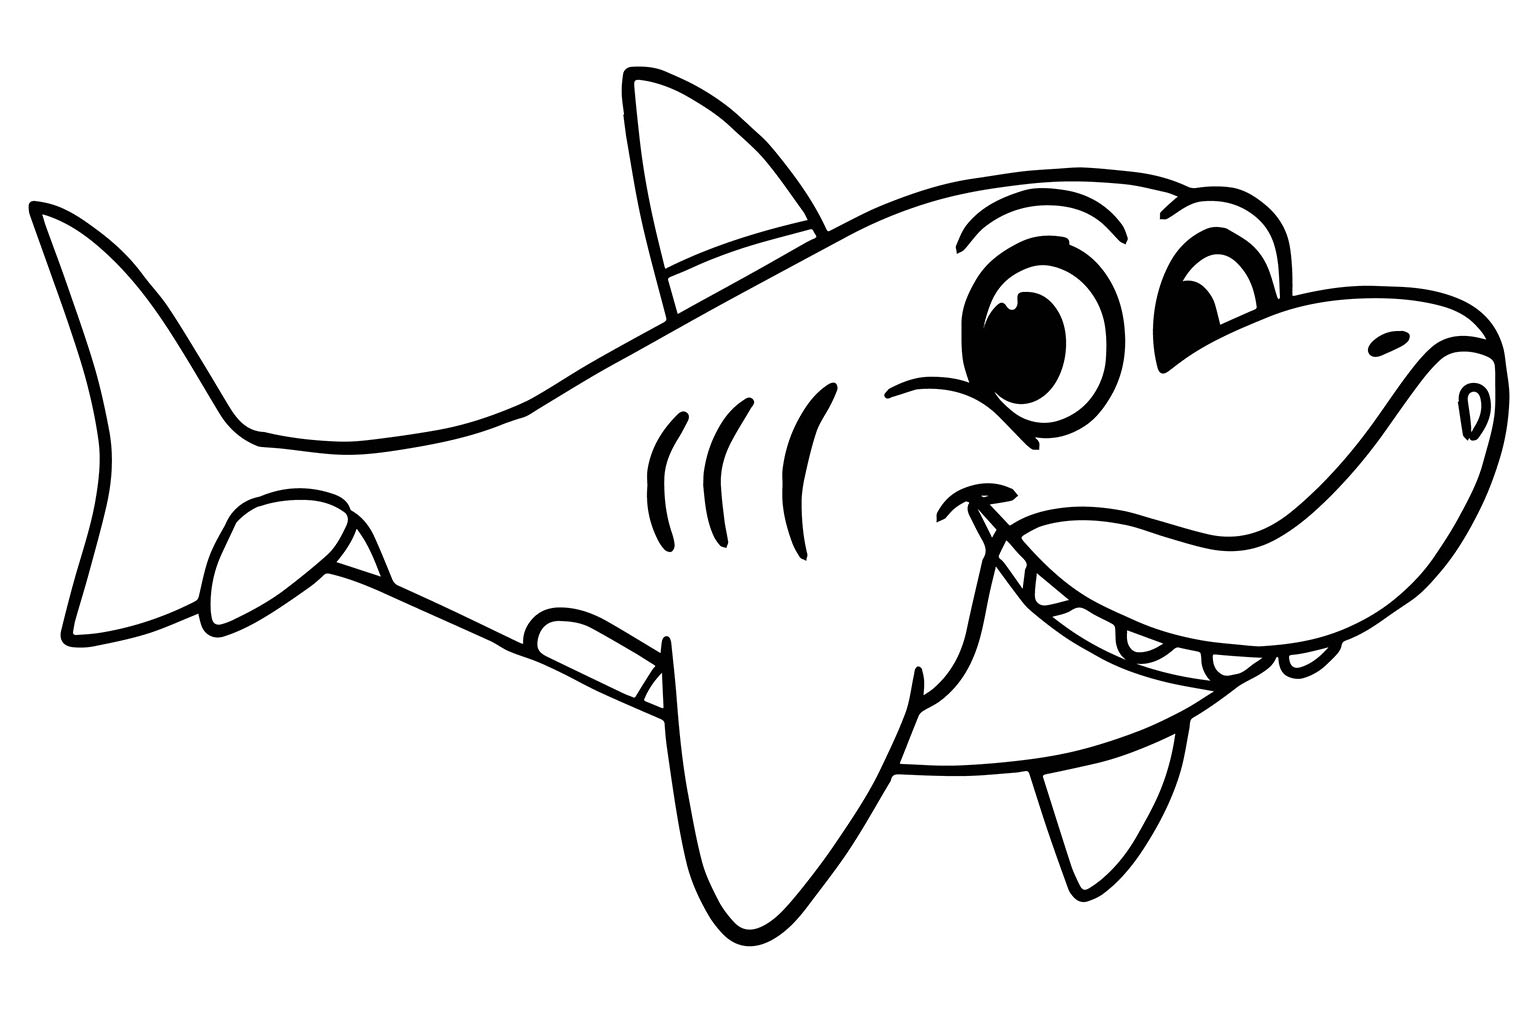 Shark Coloring Pages For Kids